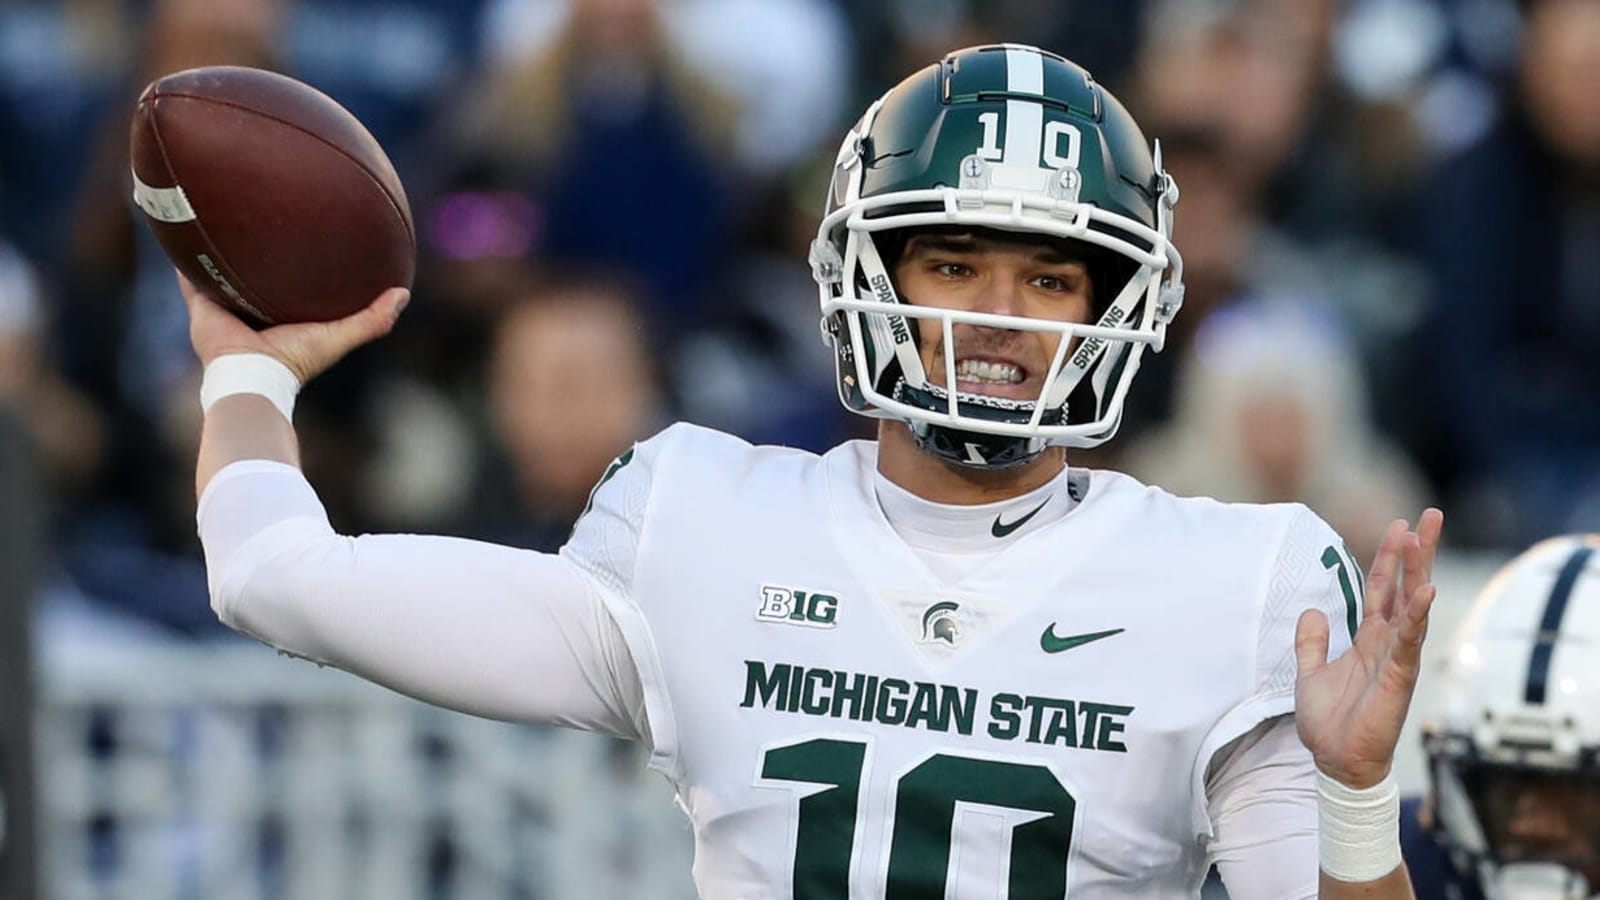 Michigan State loses its starting QB and top WR to the transfer portal